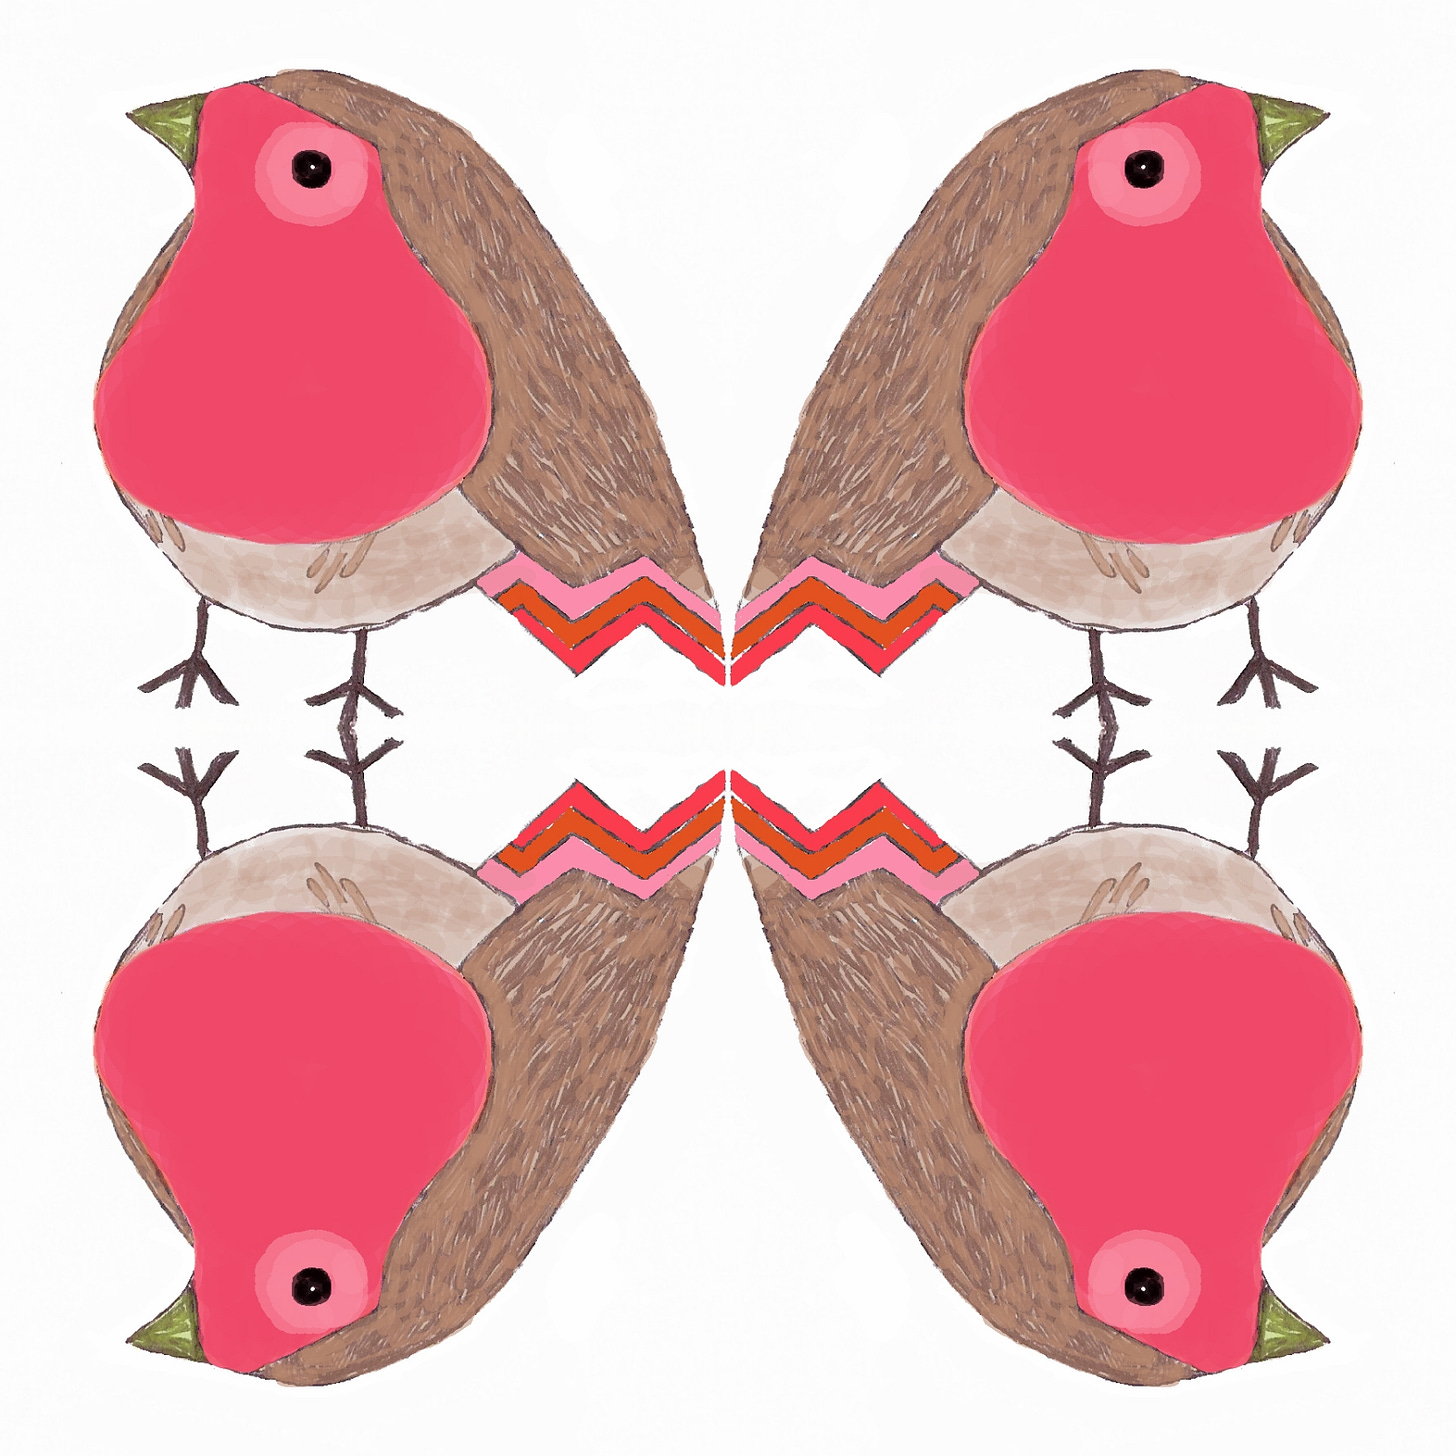 Design of 4 robins on white background by Julia Laing